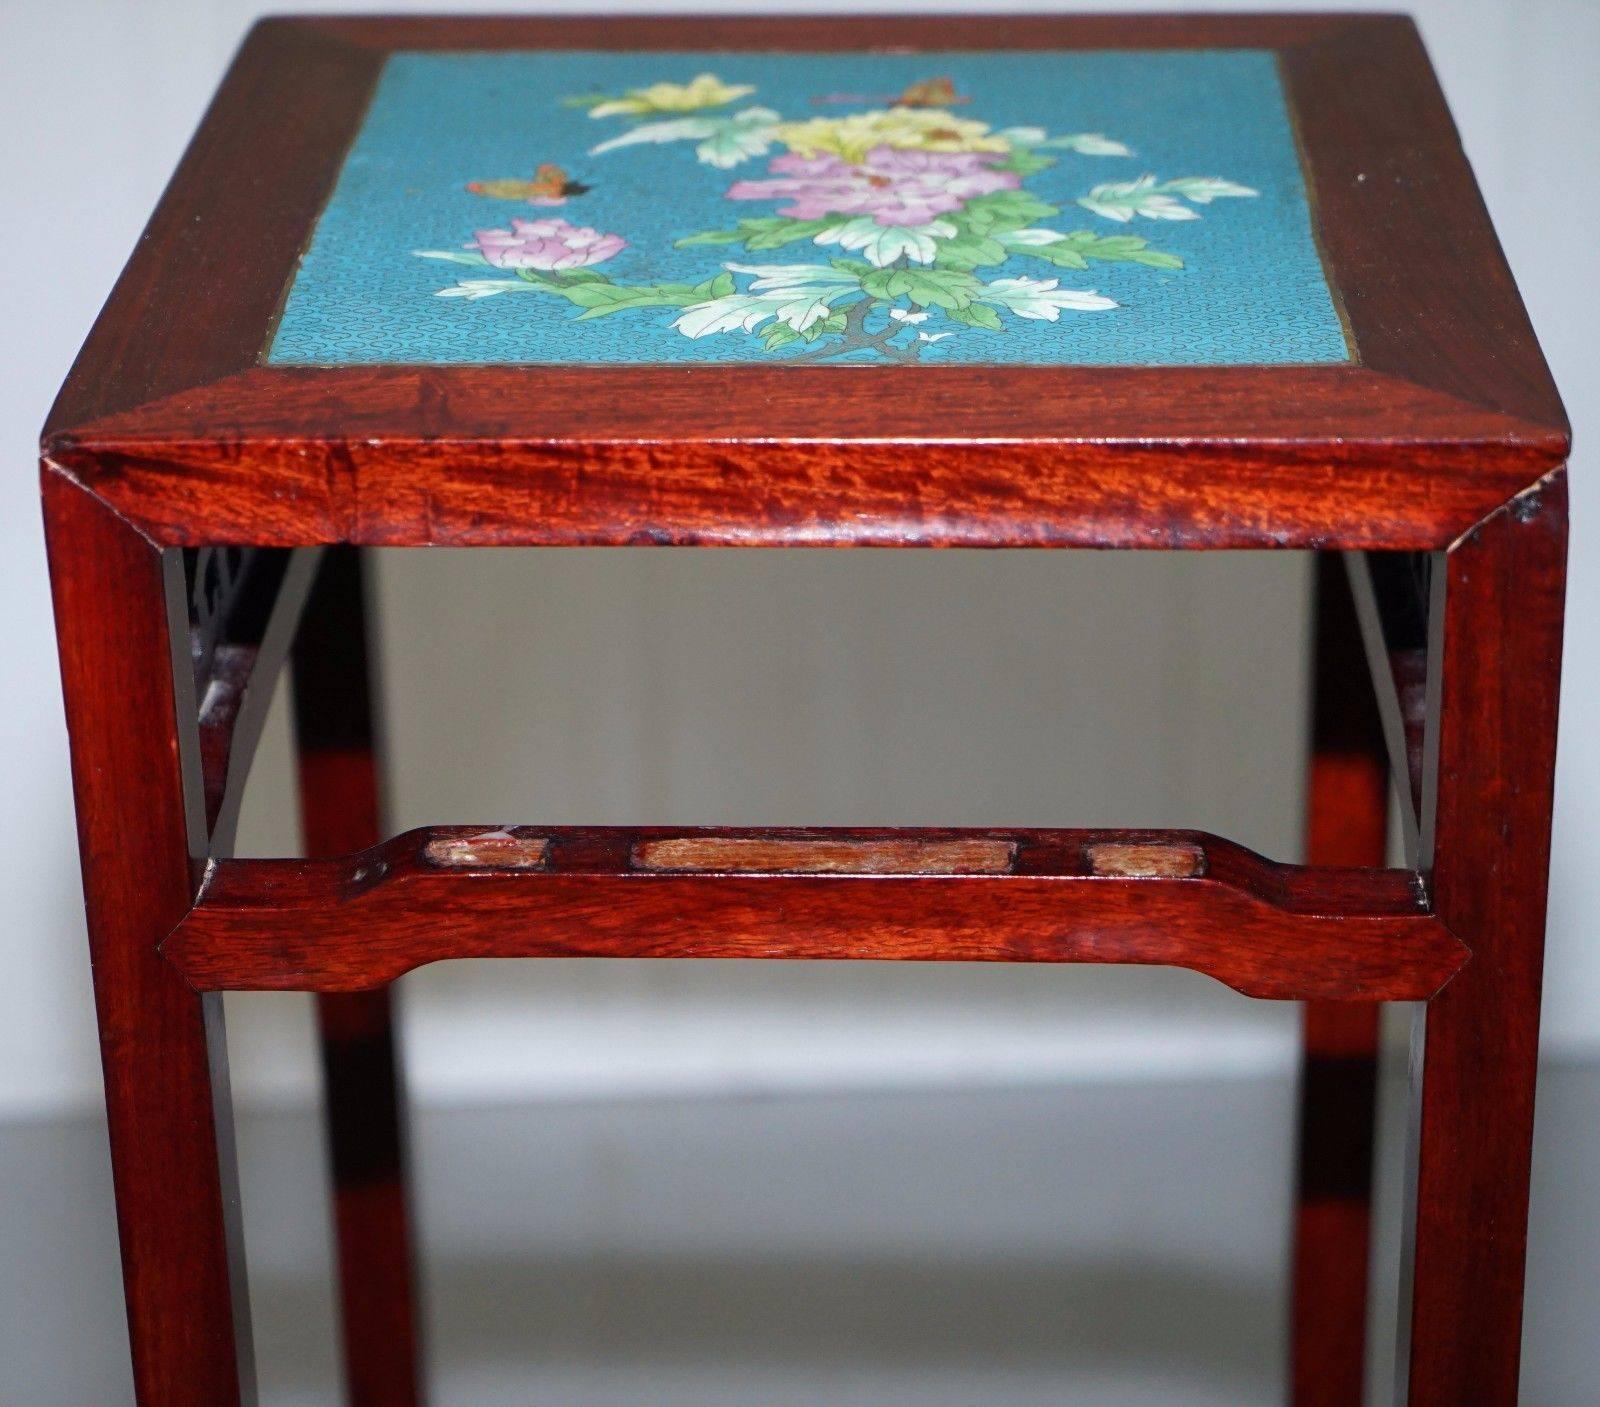 Chinese Export Chinese Chen Leung Rosewood Plant Pot Jardiniere Stand Signed Fret Tiles